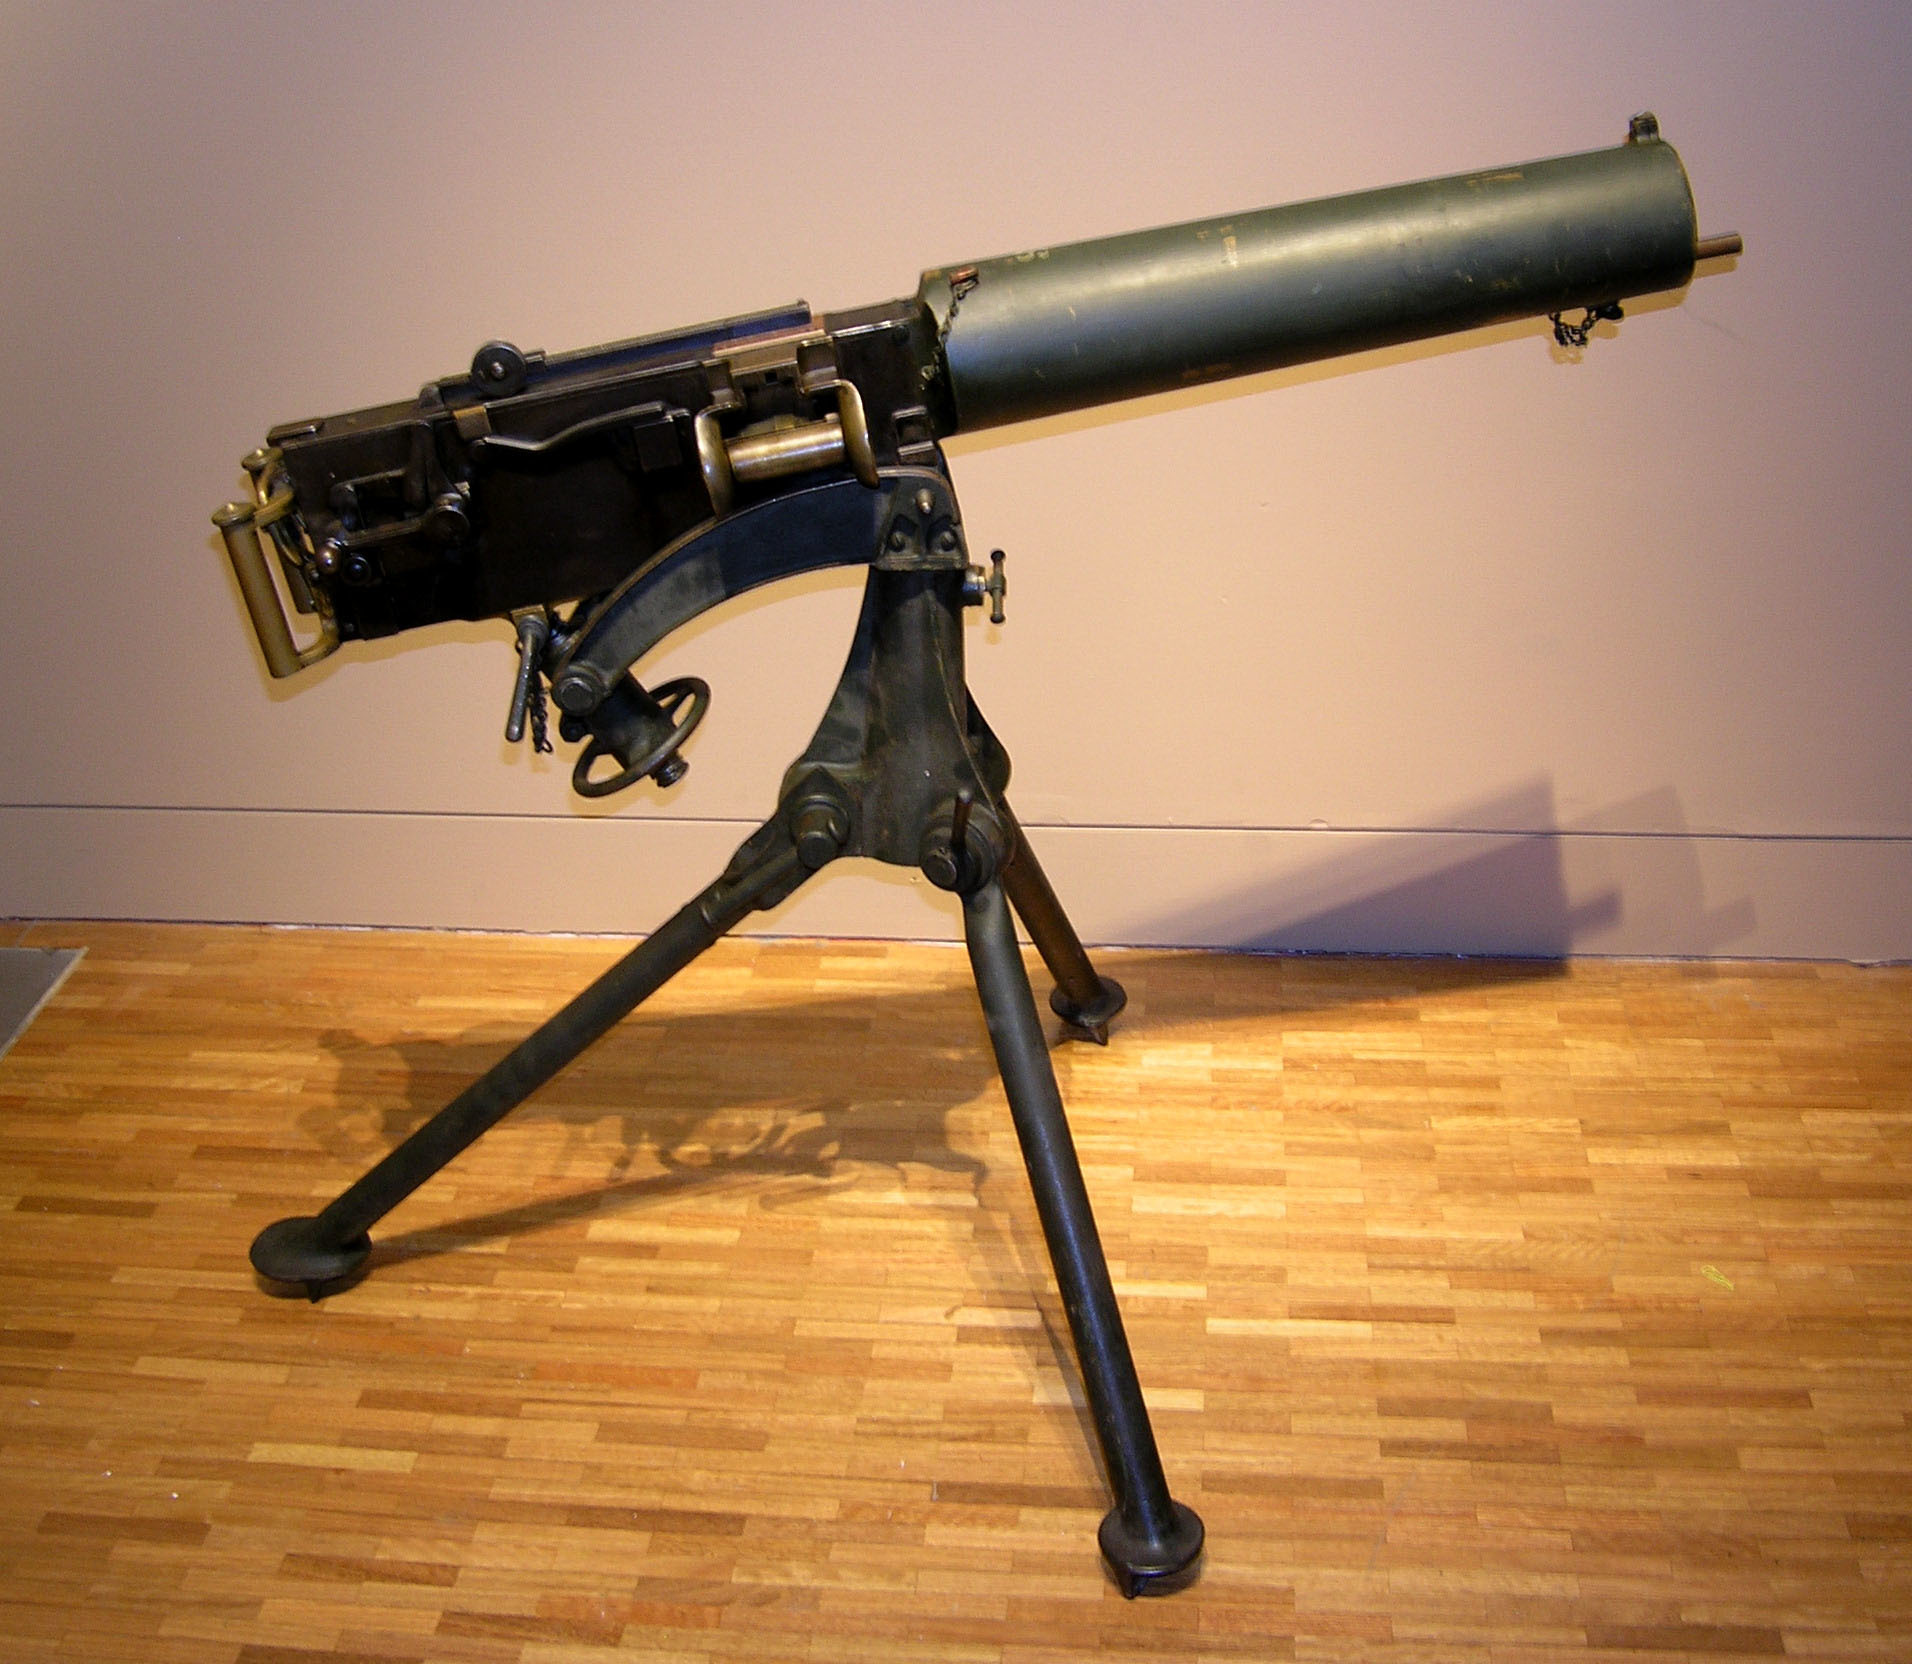 List 98+ Images pictures of a machine gun Updated